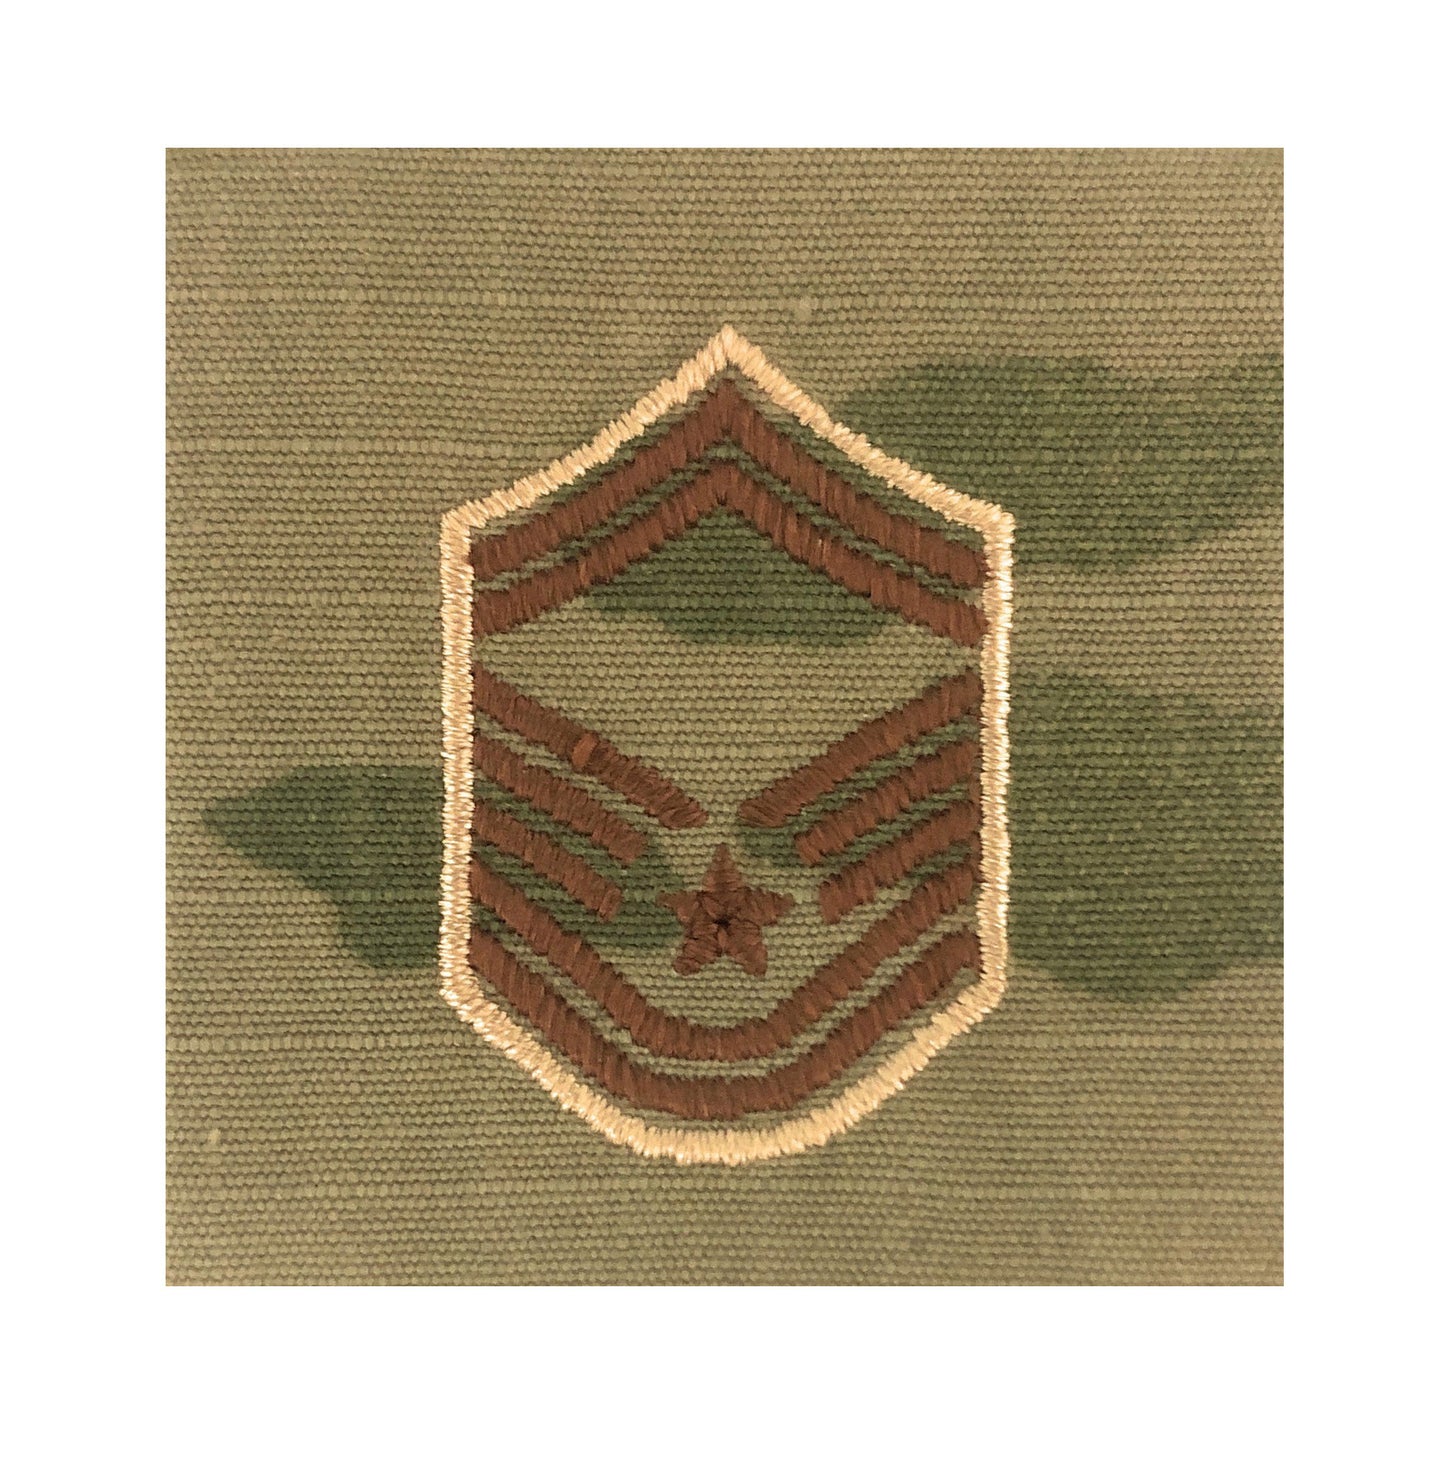 U.S. Air Force E8 Senior Master Sergeant OCP Spice Brown Sew-On Rank For Shirt,Jacket,Coat